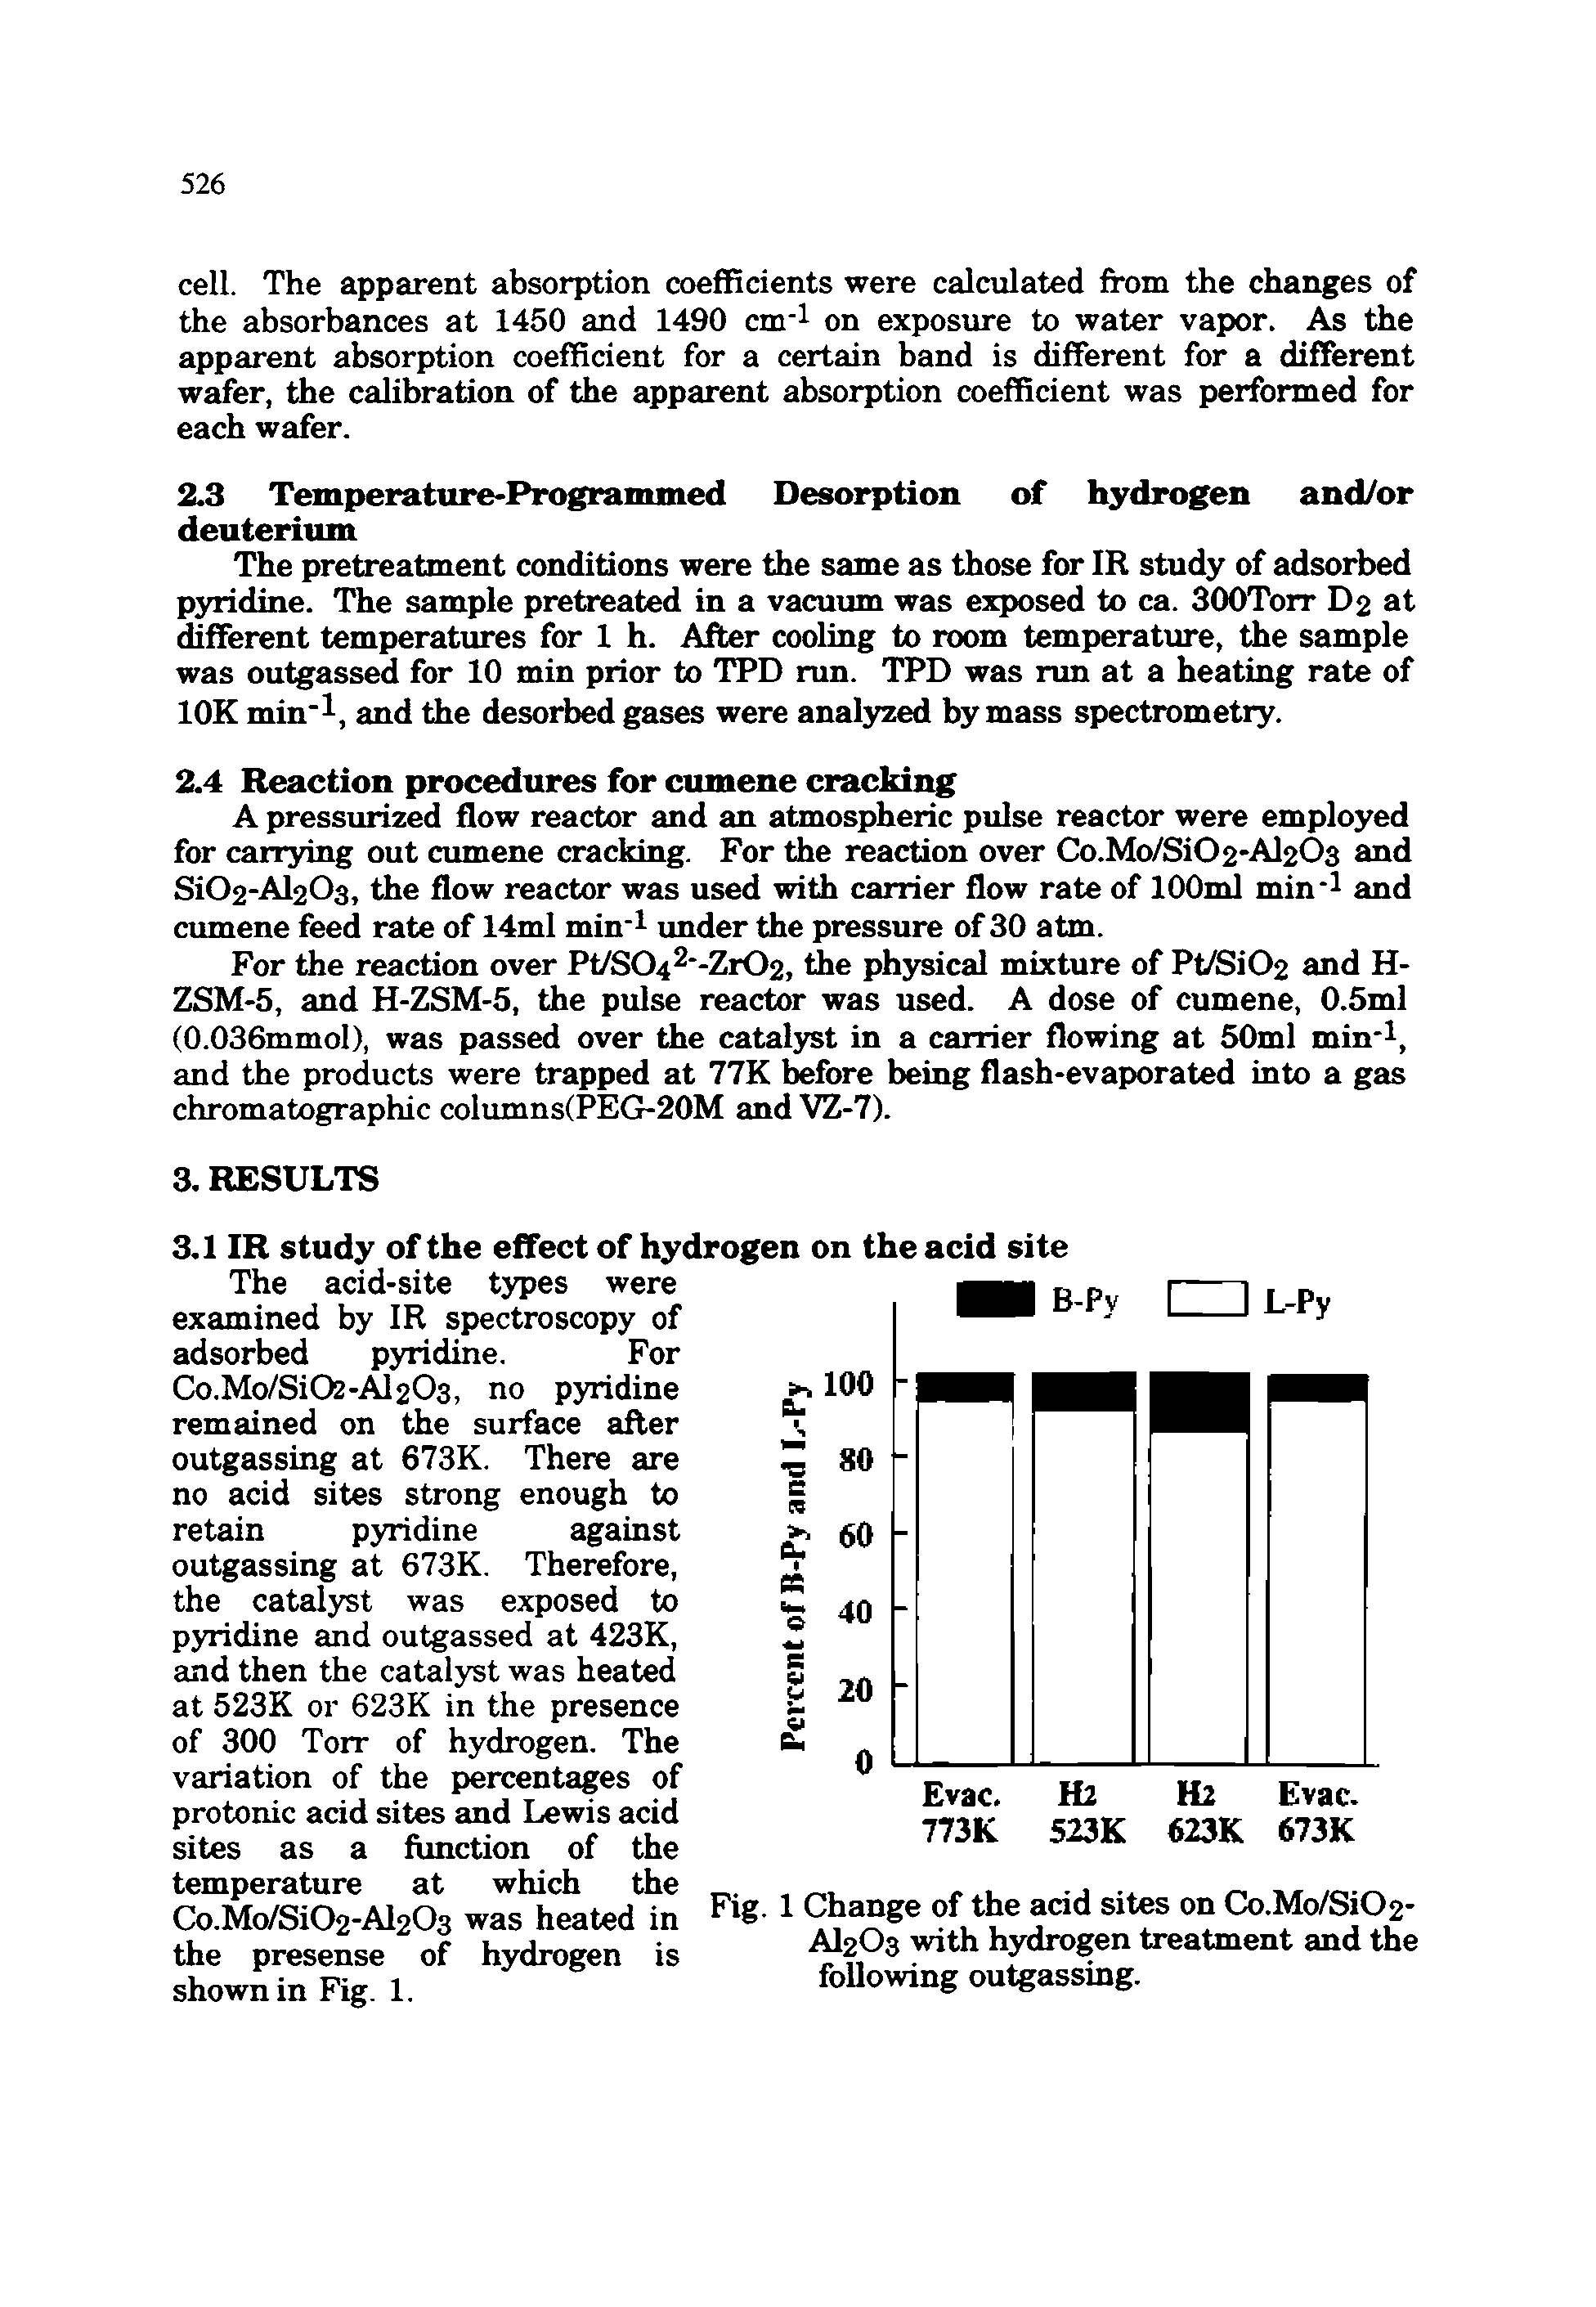 Fig. 1 Change of the acid sites on Co.Mo/Si02 AI2O3 with hydrogen treatment and the following outgassing.